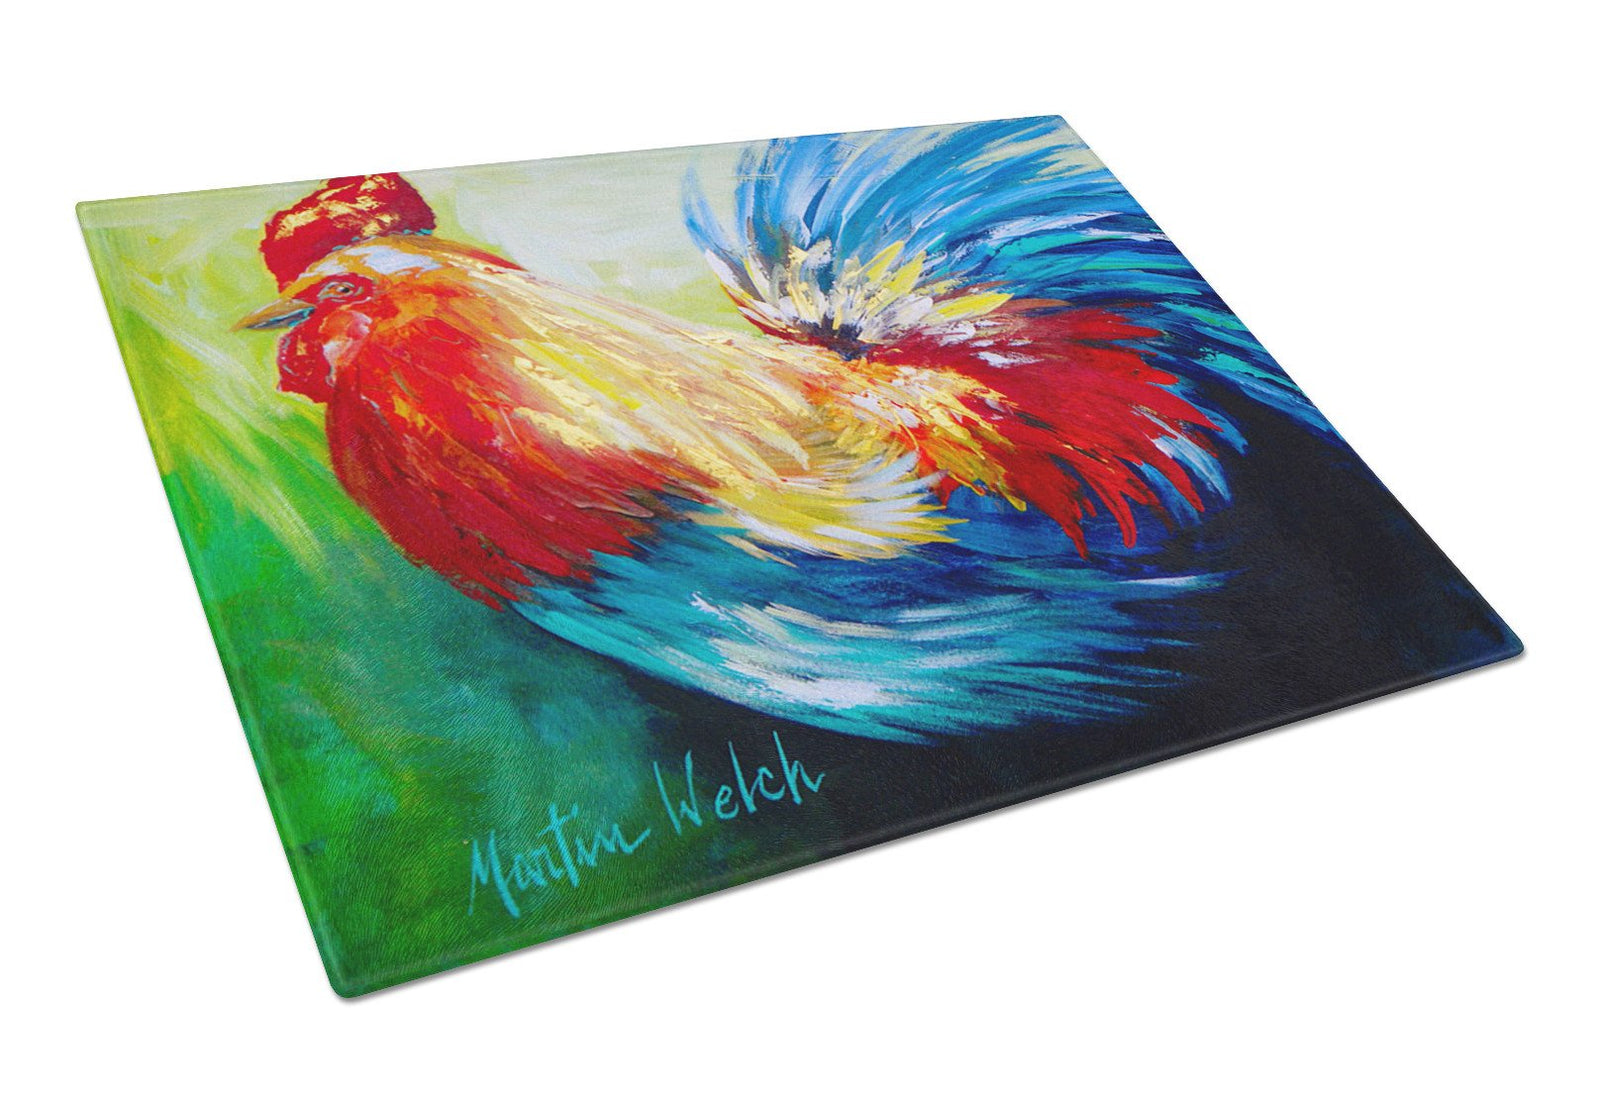 Bird - Rooster Chief Big Feathers Glass Cutting Board Large by Caroline's Treasures